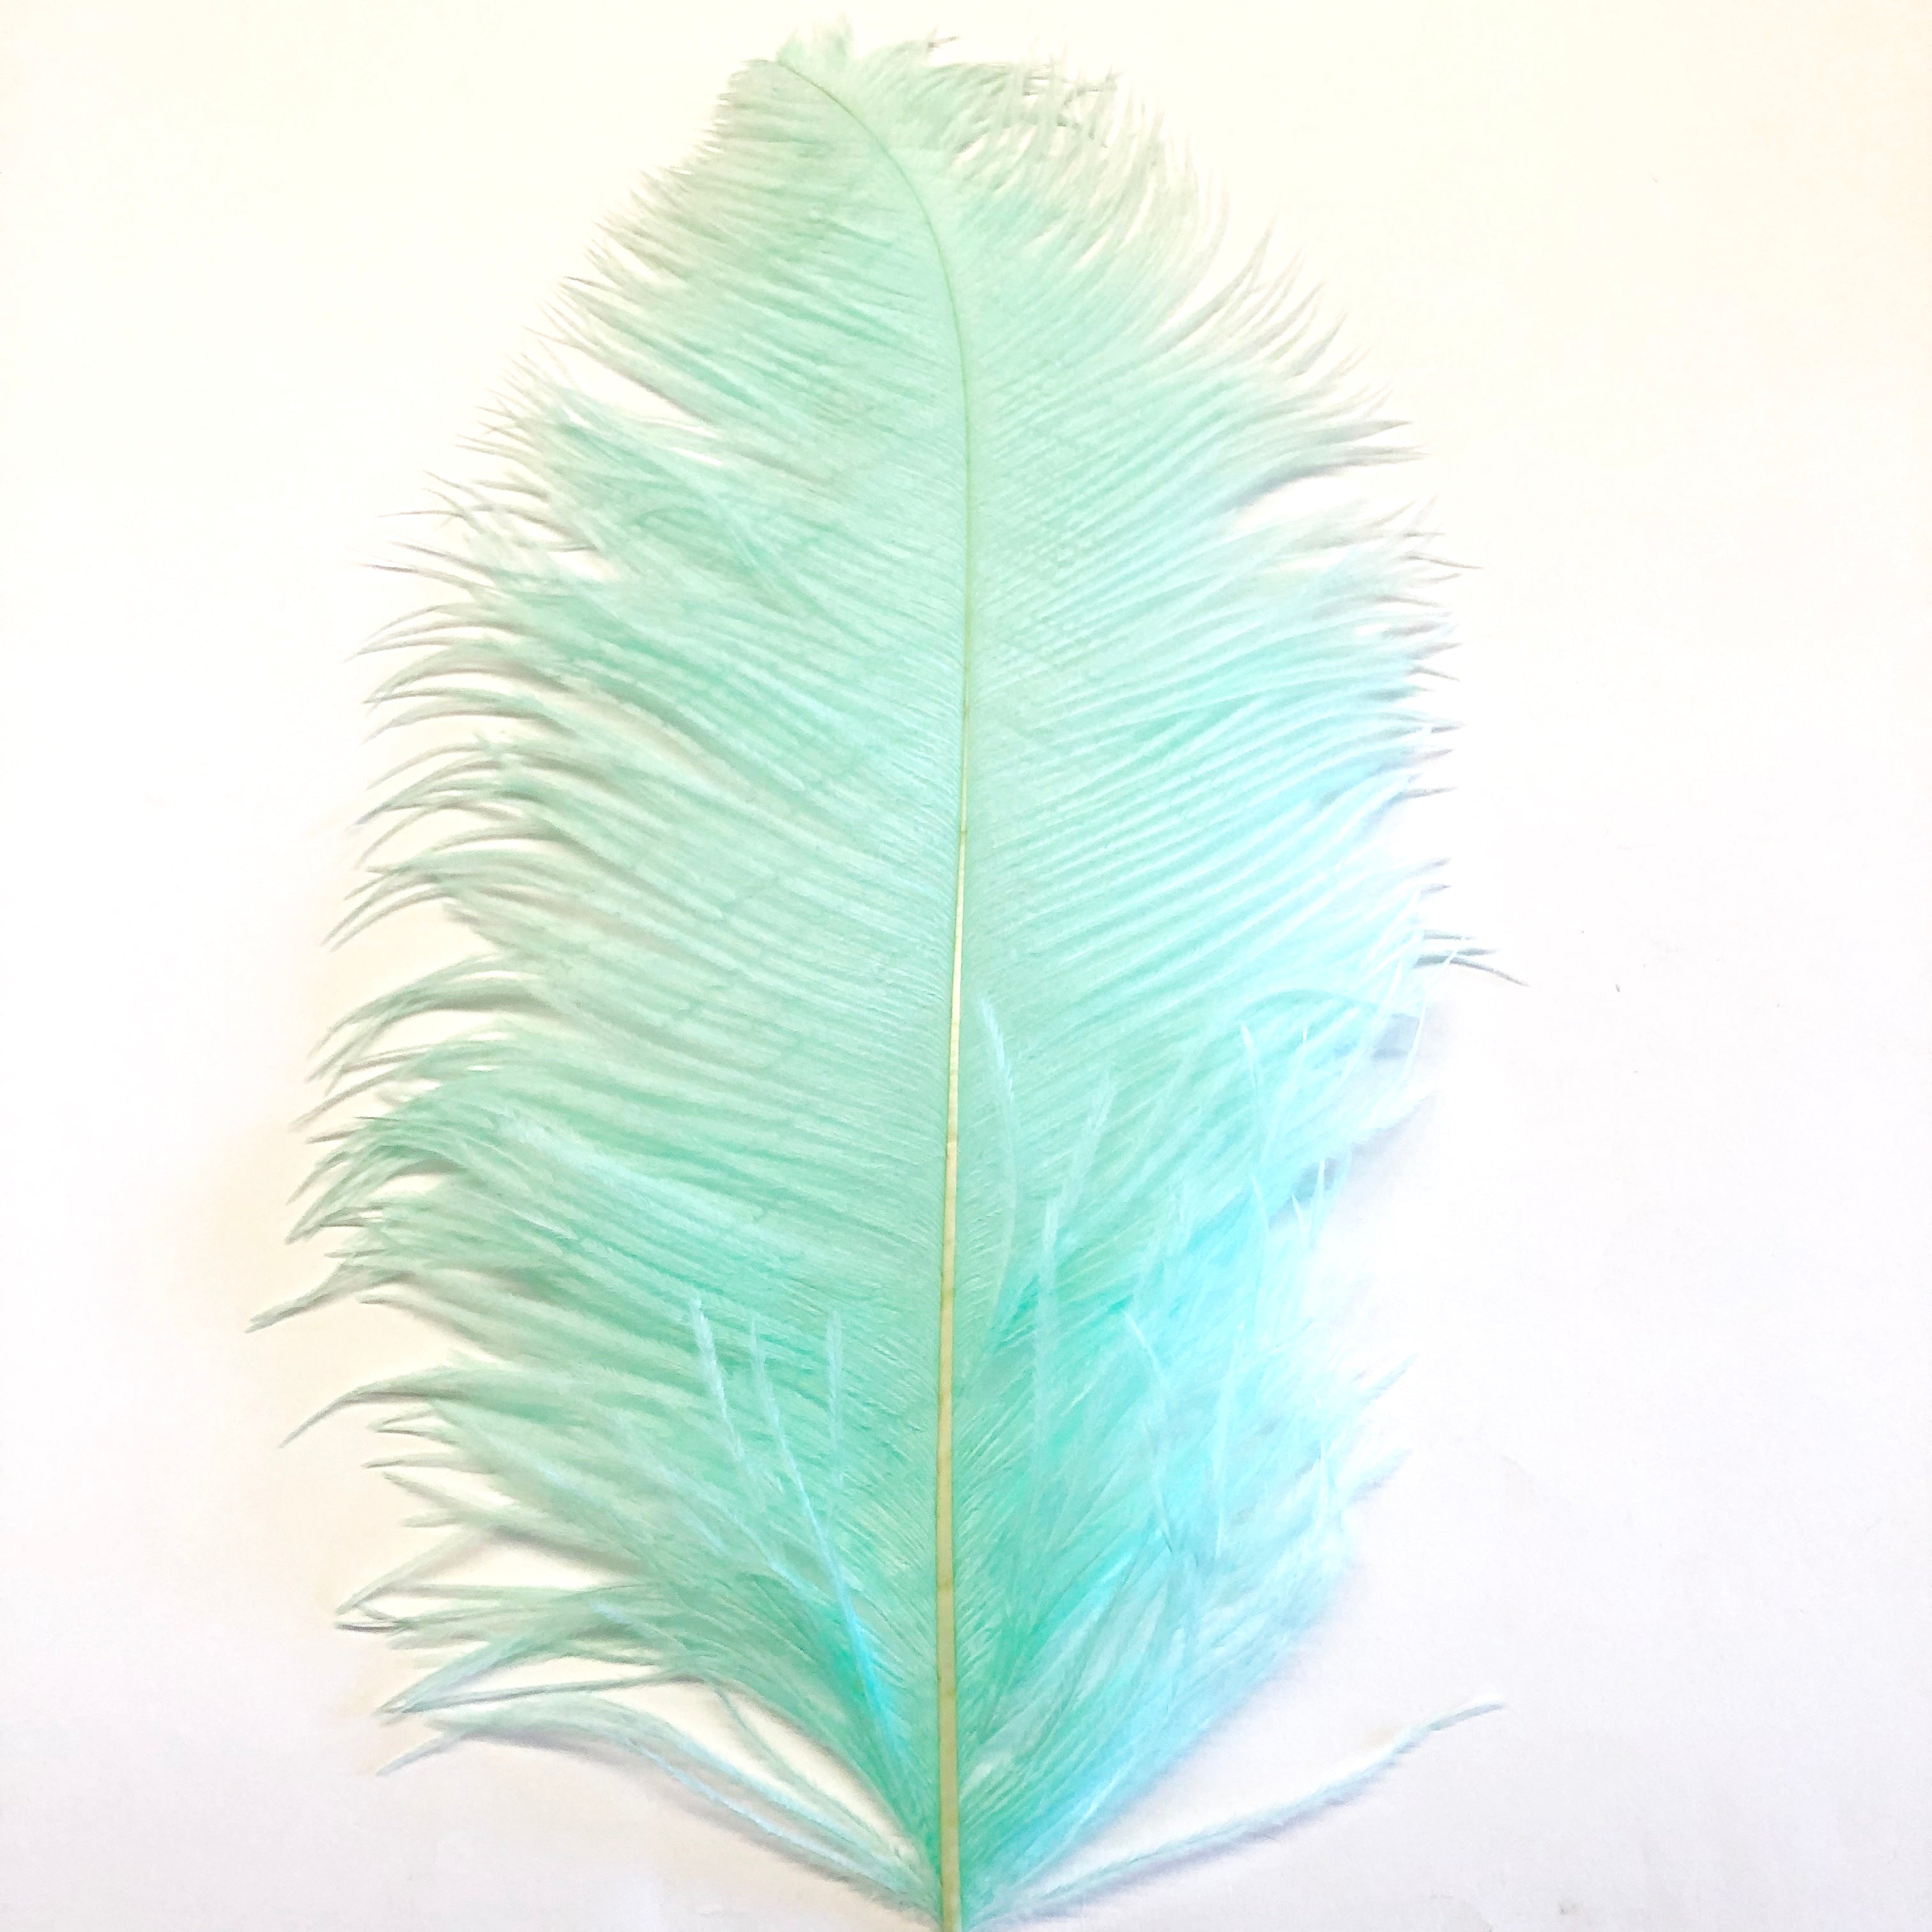 Ostrich Wing Feather Plumes 50-55cm (20-22") - Mint Green